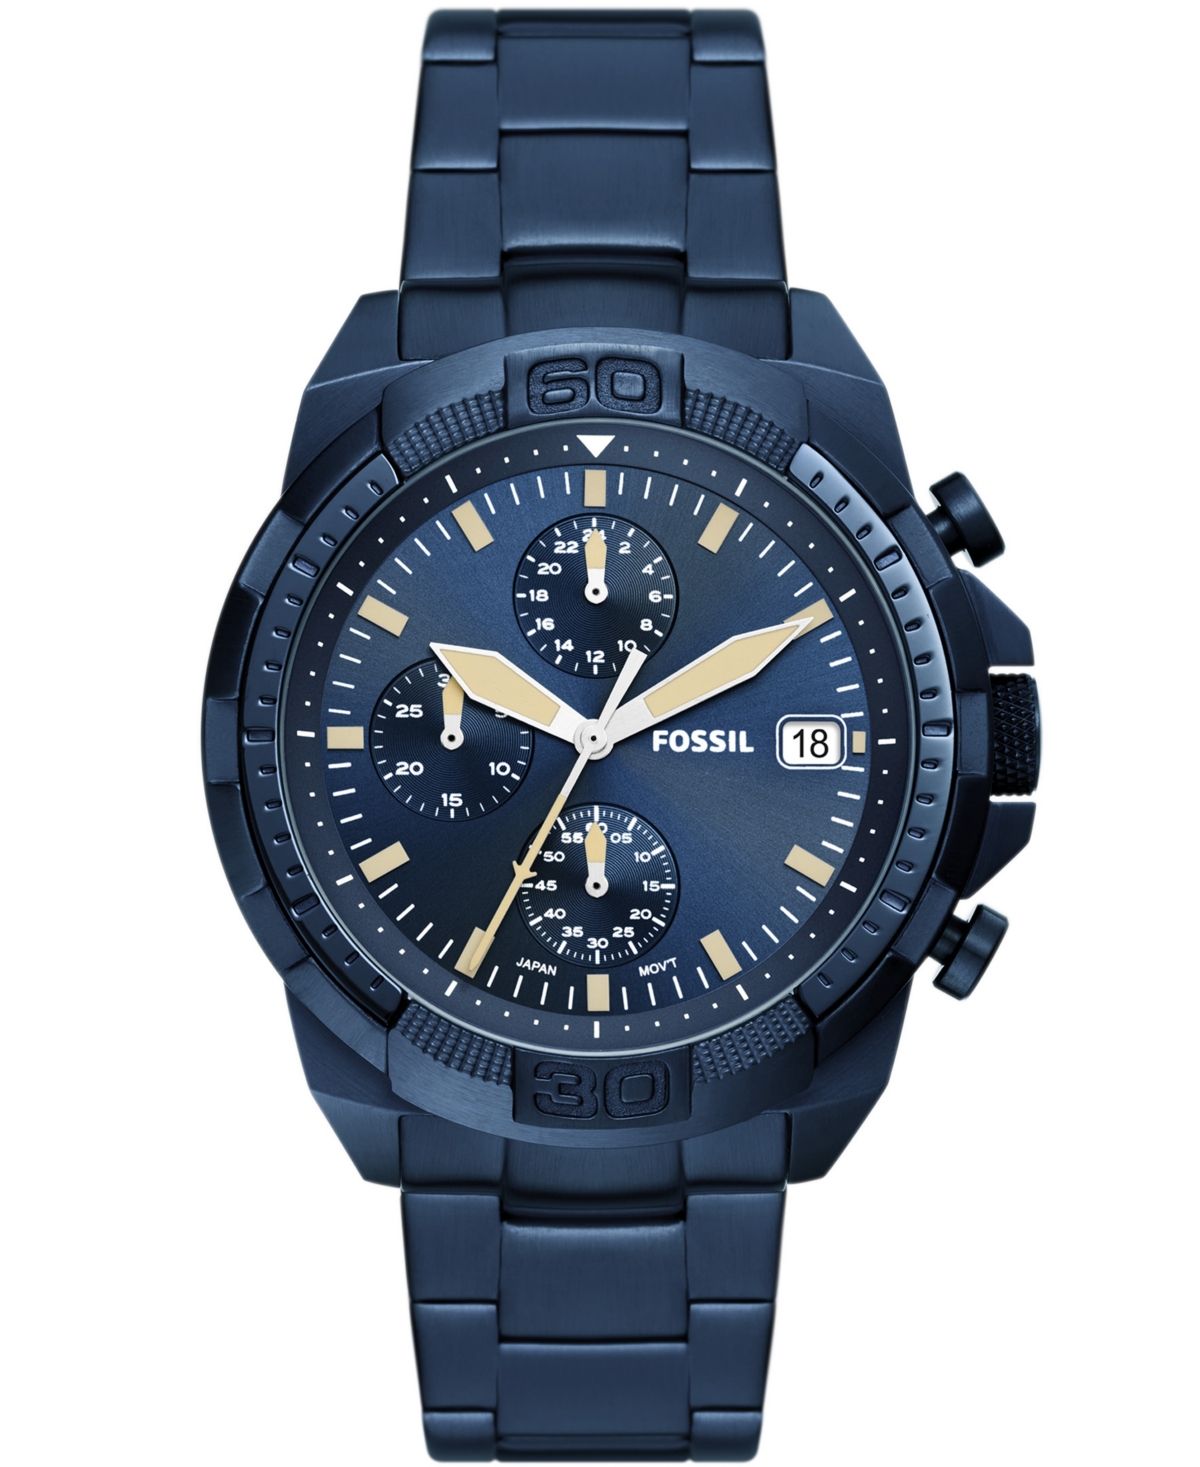 FOSSIL MEN'S BRONSON CHRONOGRAPH, BLUE ION PLATING STAINLESS BRACELET WATCH 44MM